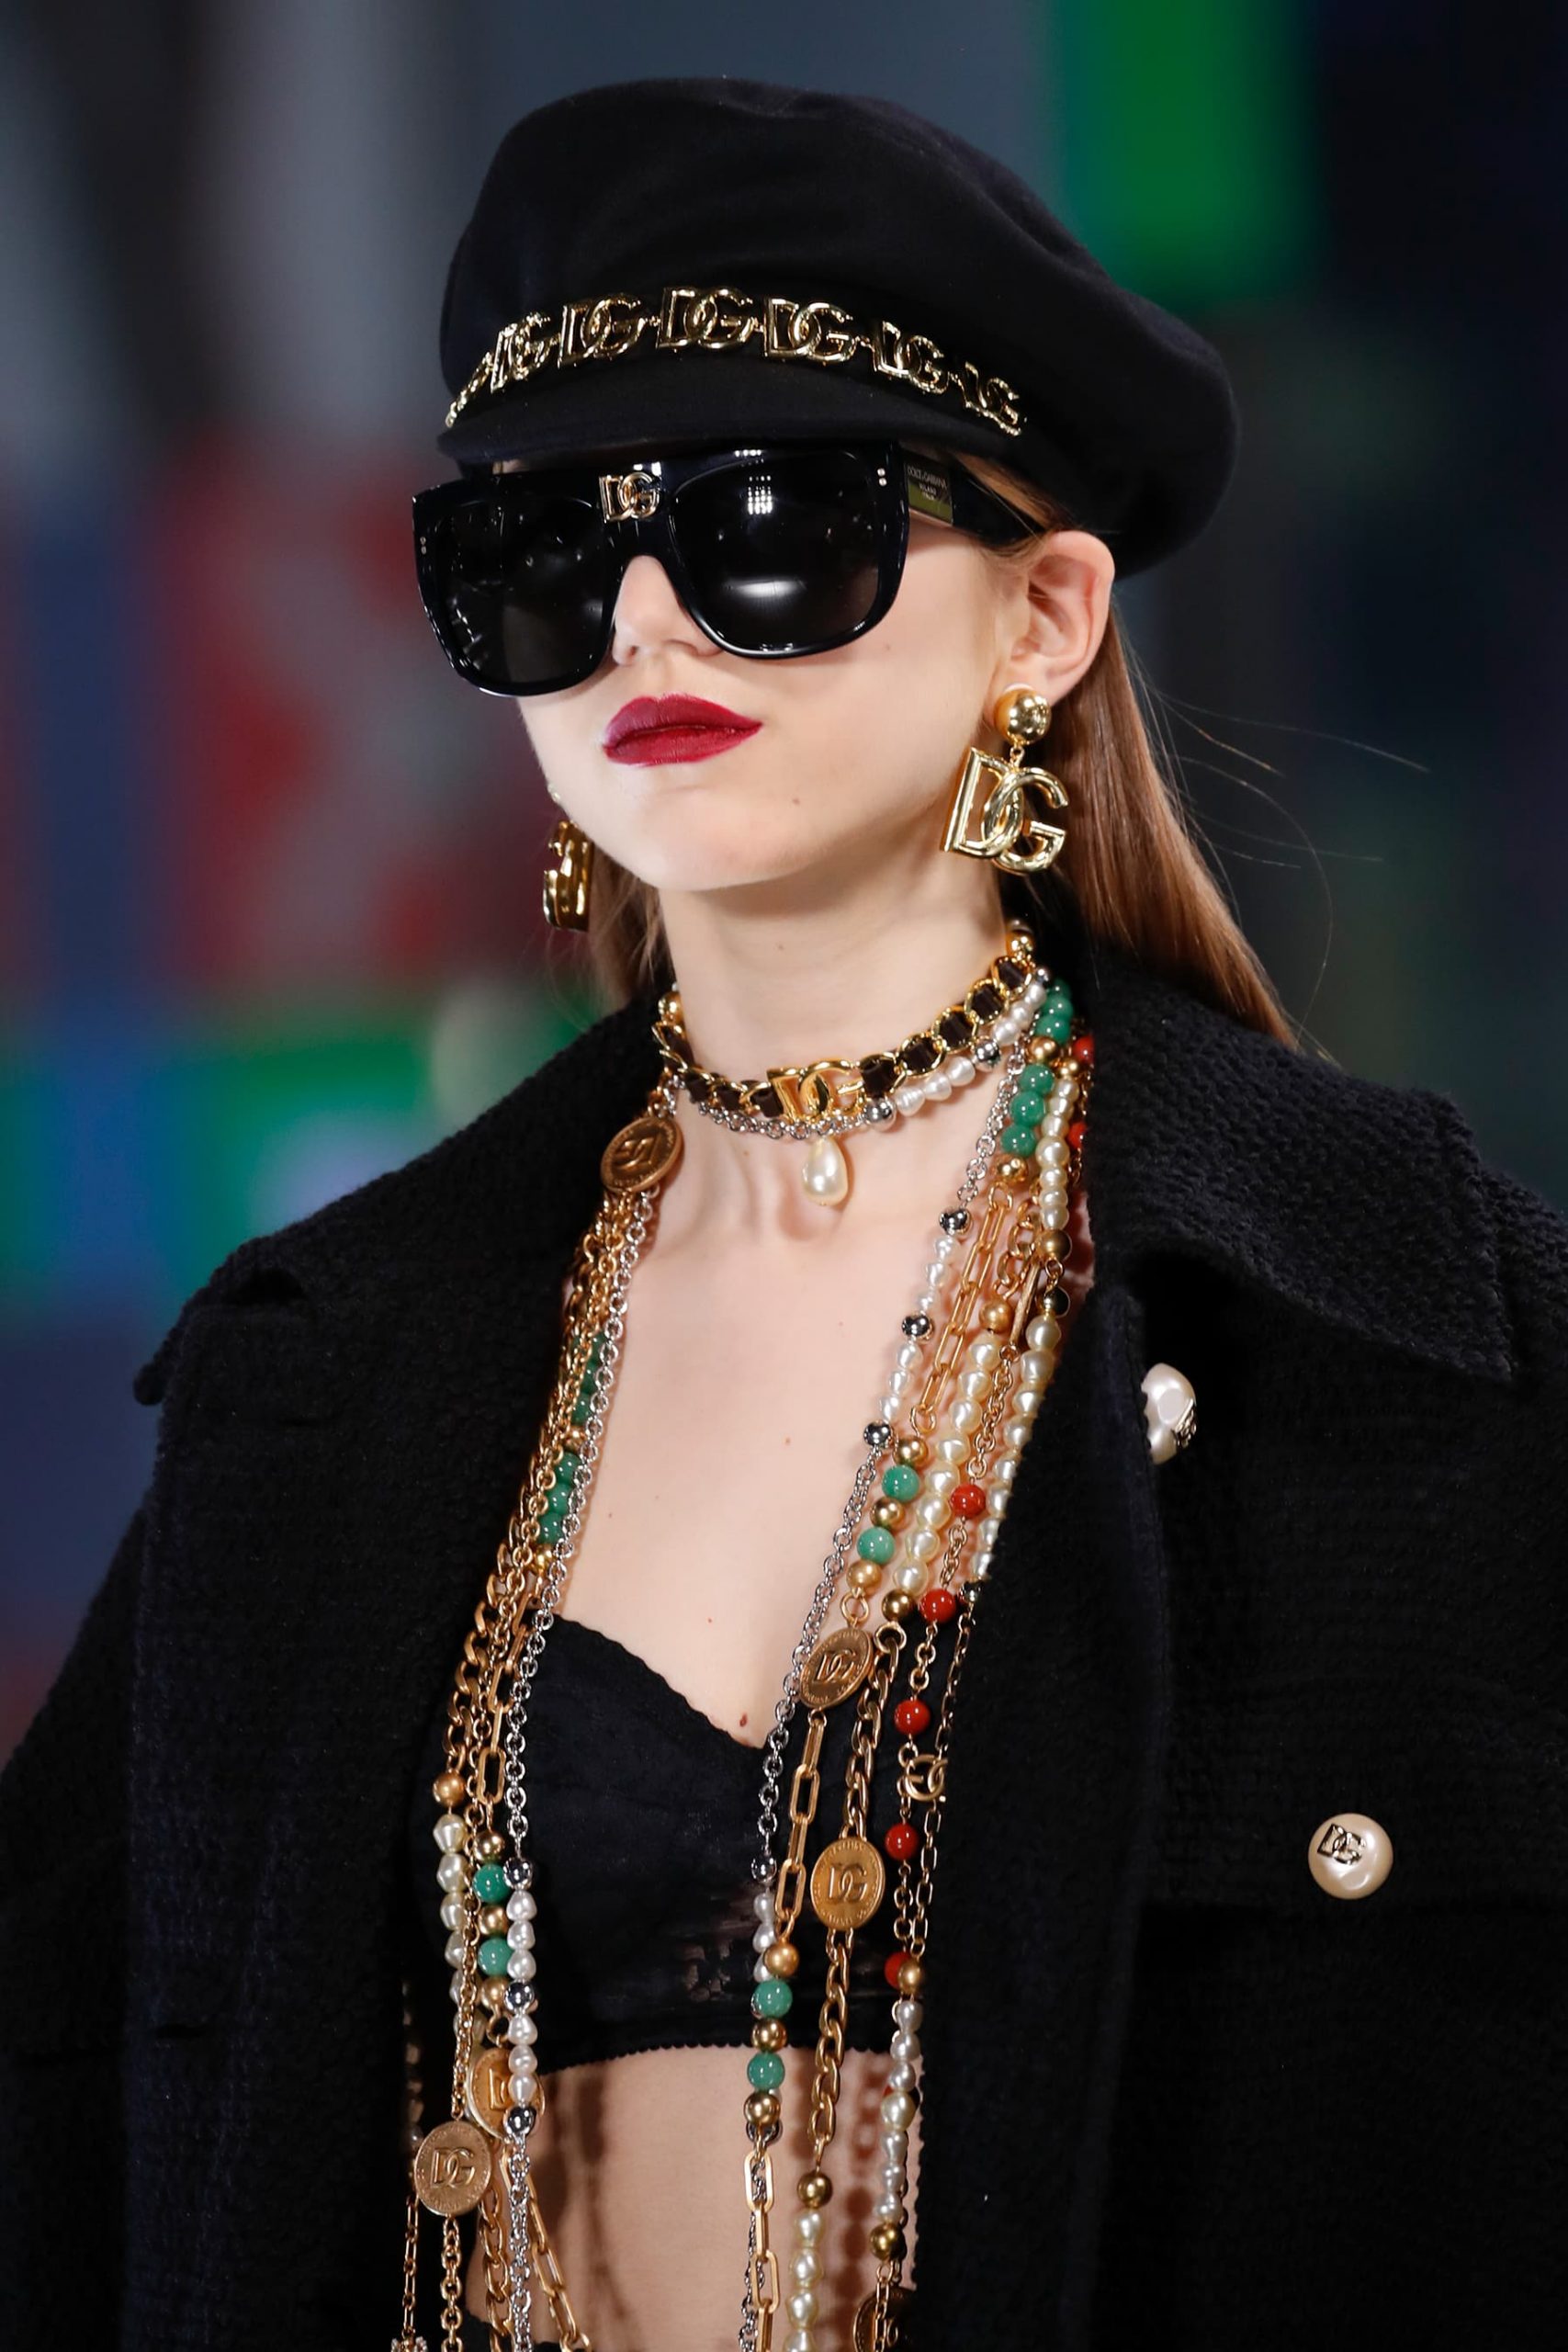 Dolce & Gabbana Fall 2021 Details | The Impression